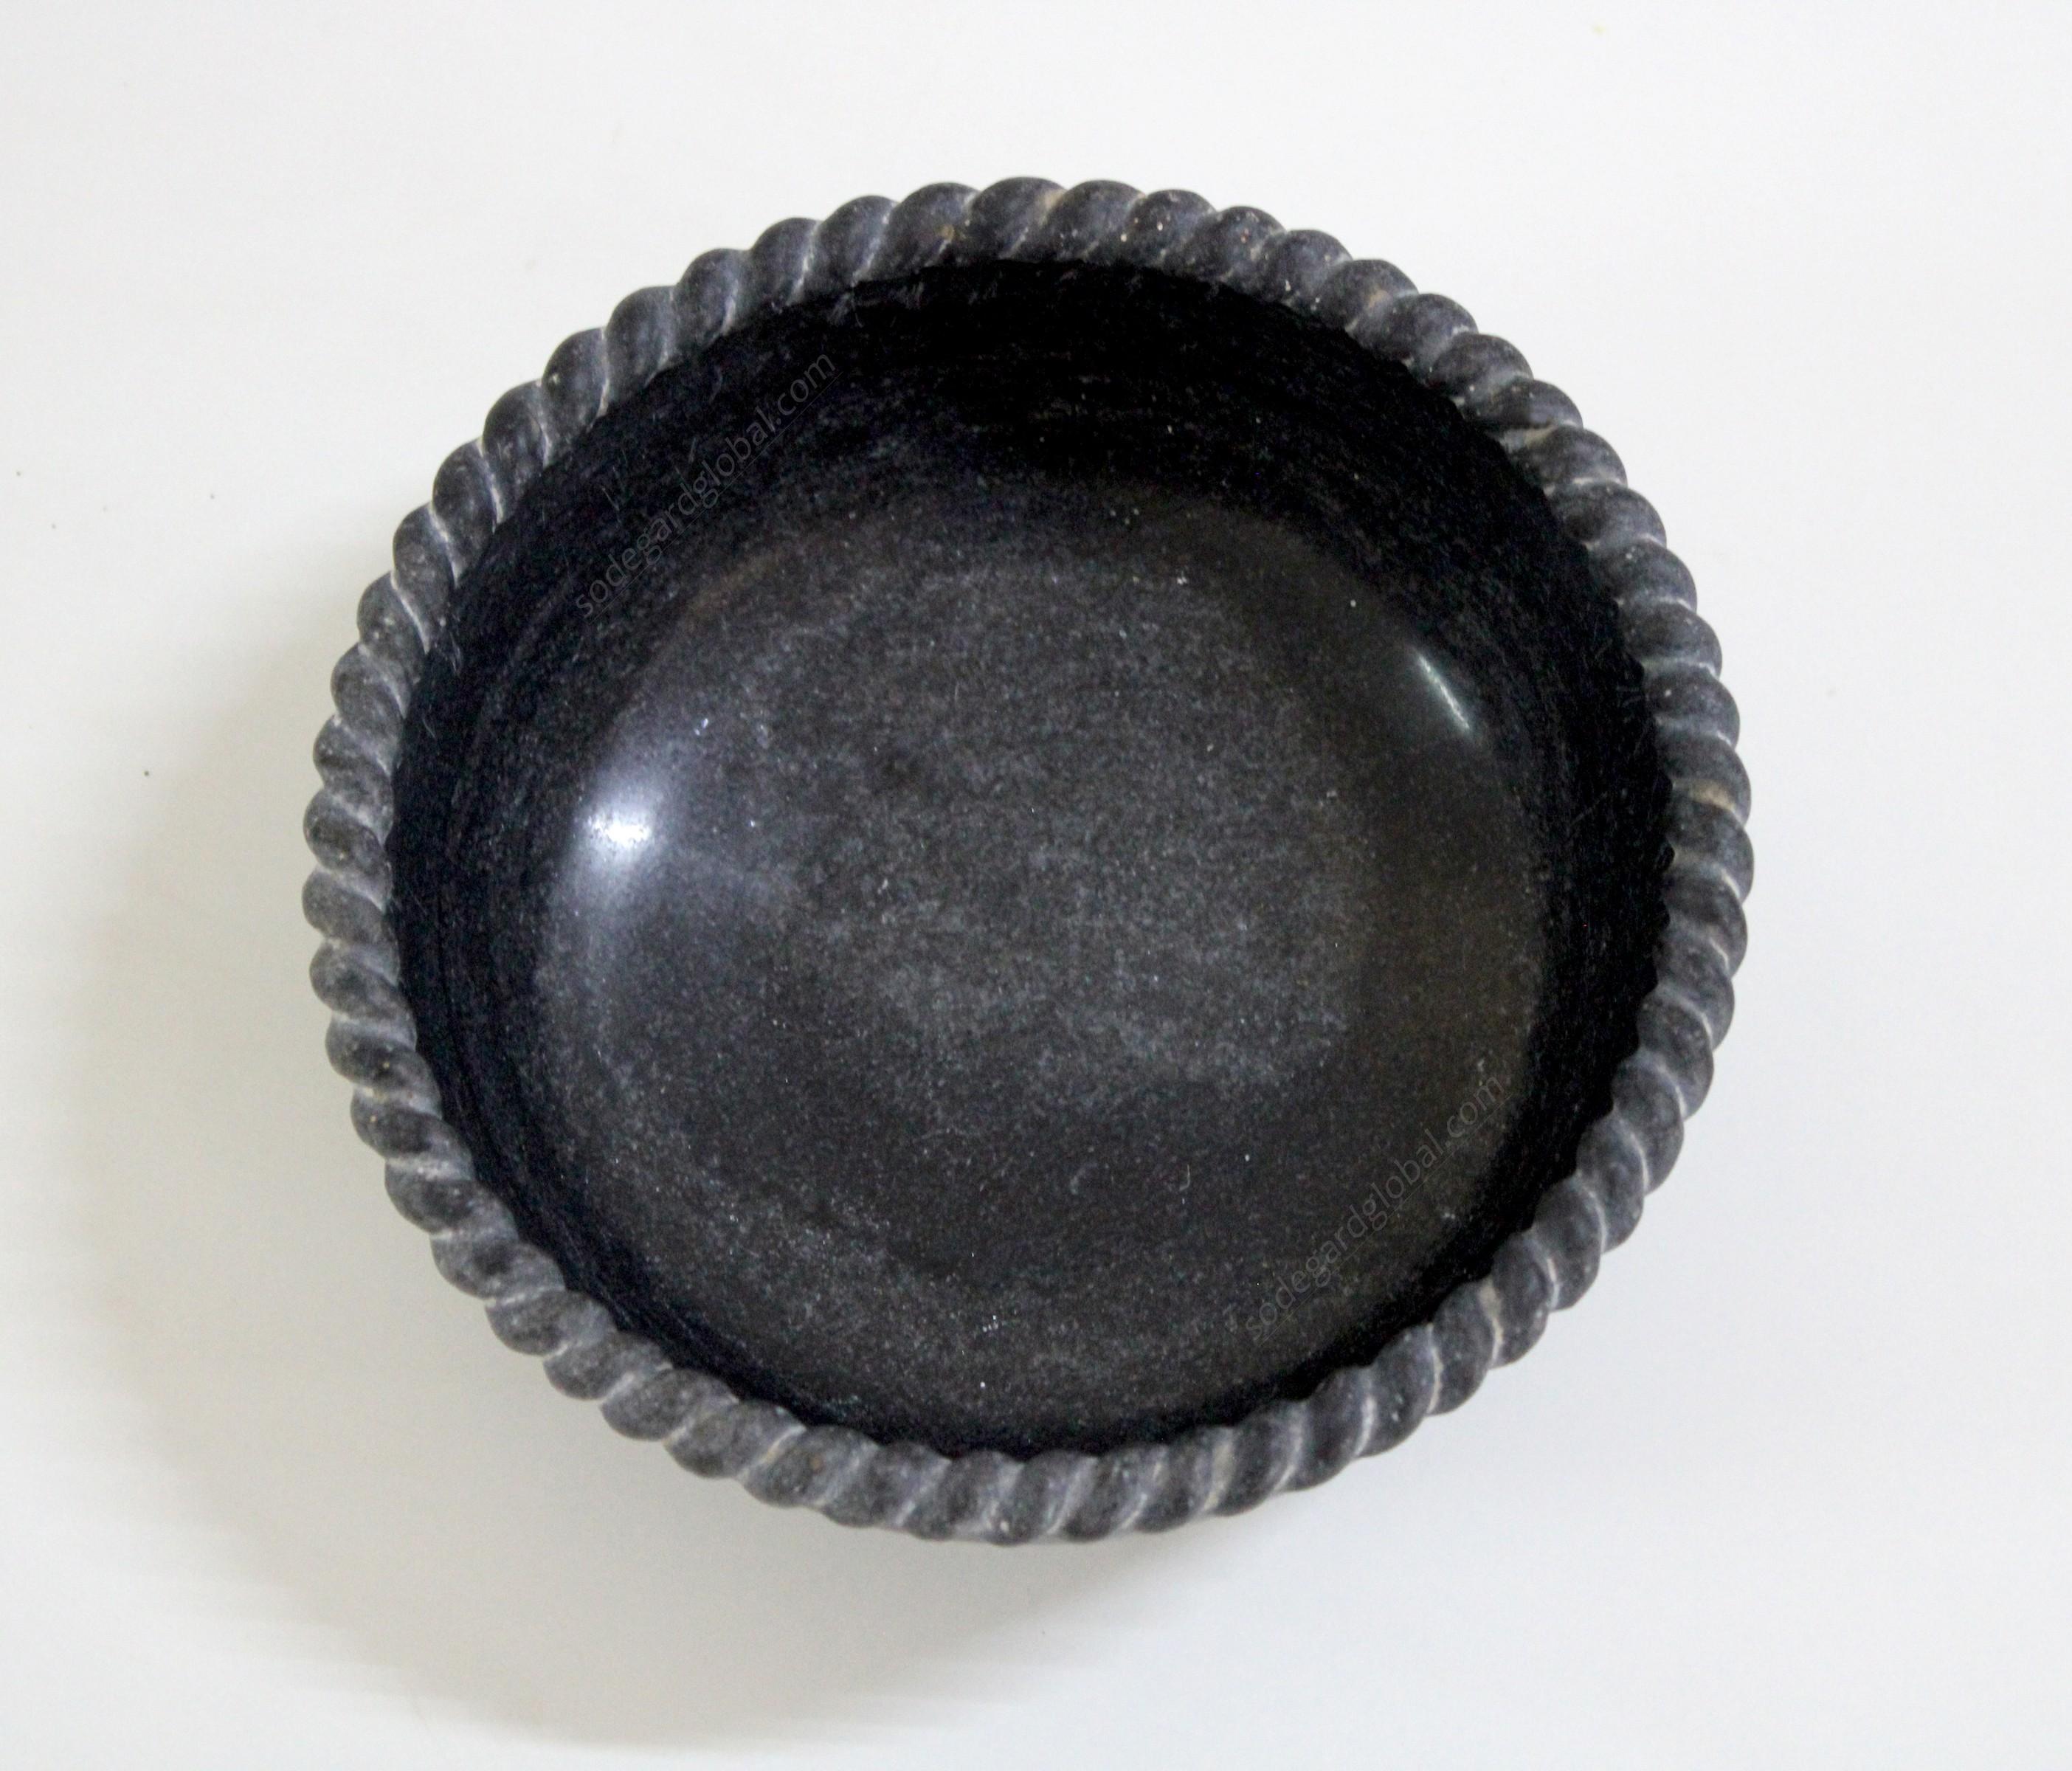 Sculpted out of a single block of marble with a delicately carved rope edge, perfect for a potpourri, a fruit bowl or just a key catch.


Round Rope Bowl in Black Marble
Size- 10” x 10” x 4” H
Materials - Black Marble, Hand-Carved


Buyer